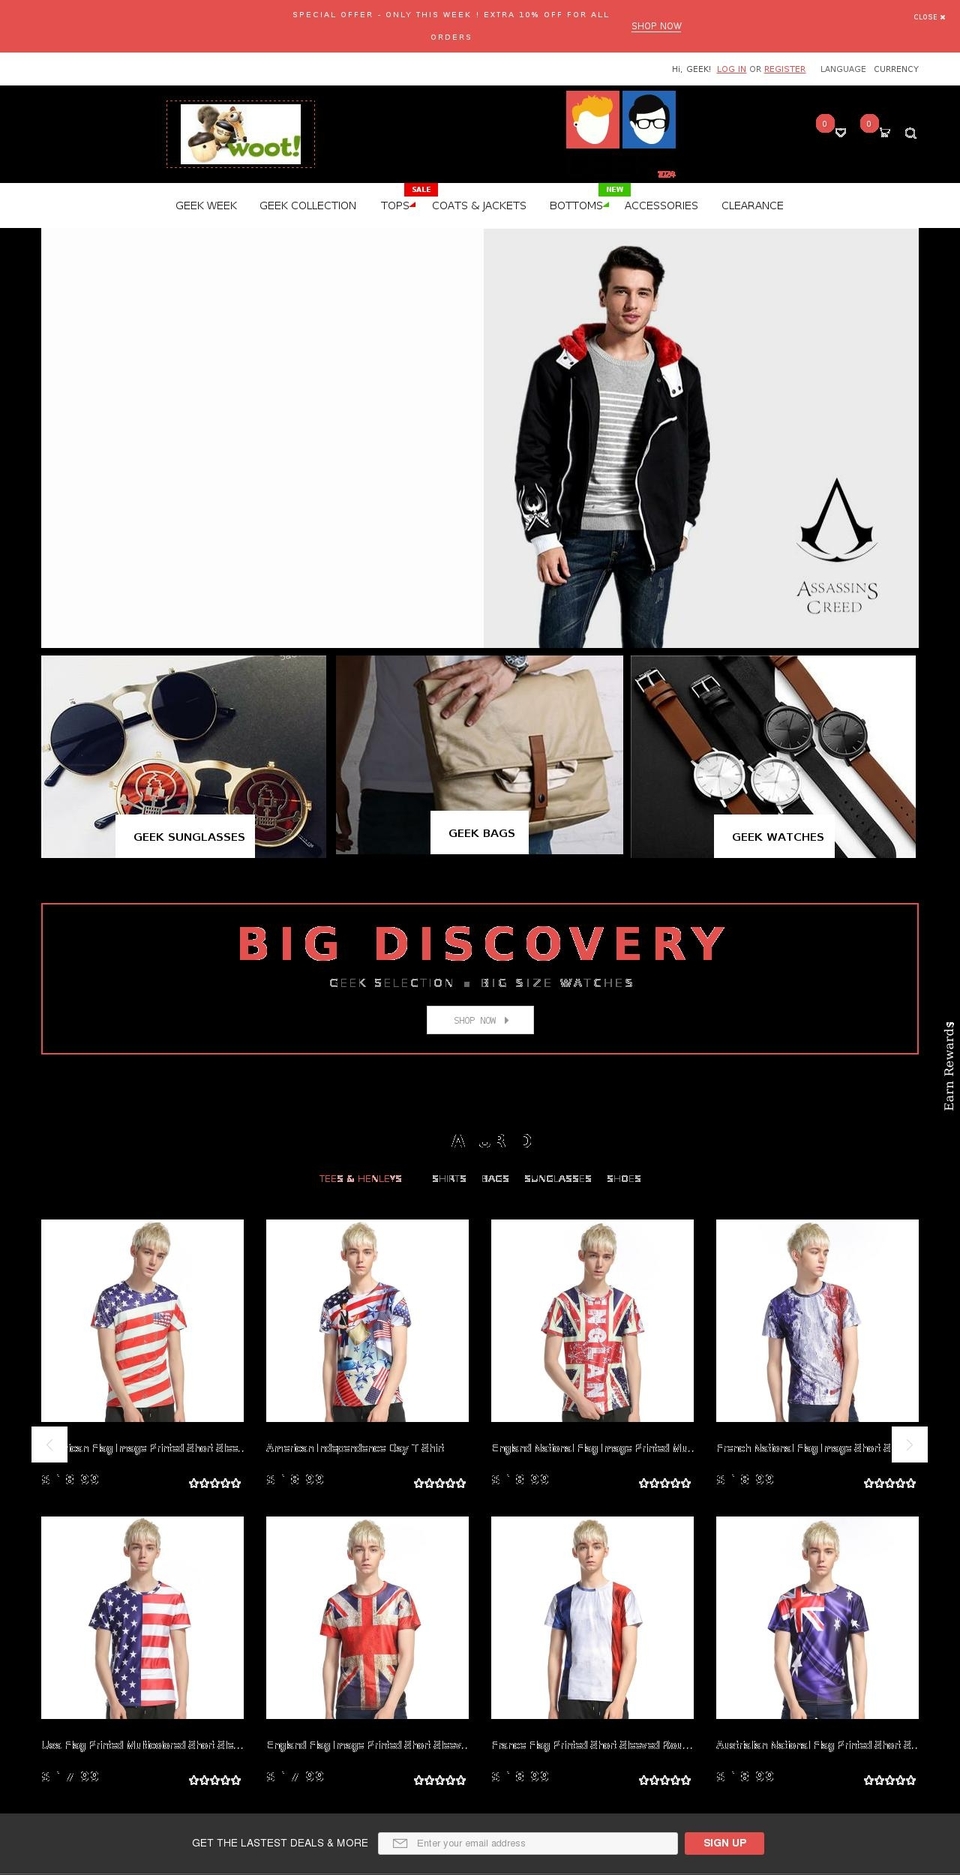 Vision Shopify theme site example geeks1024.com